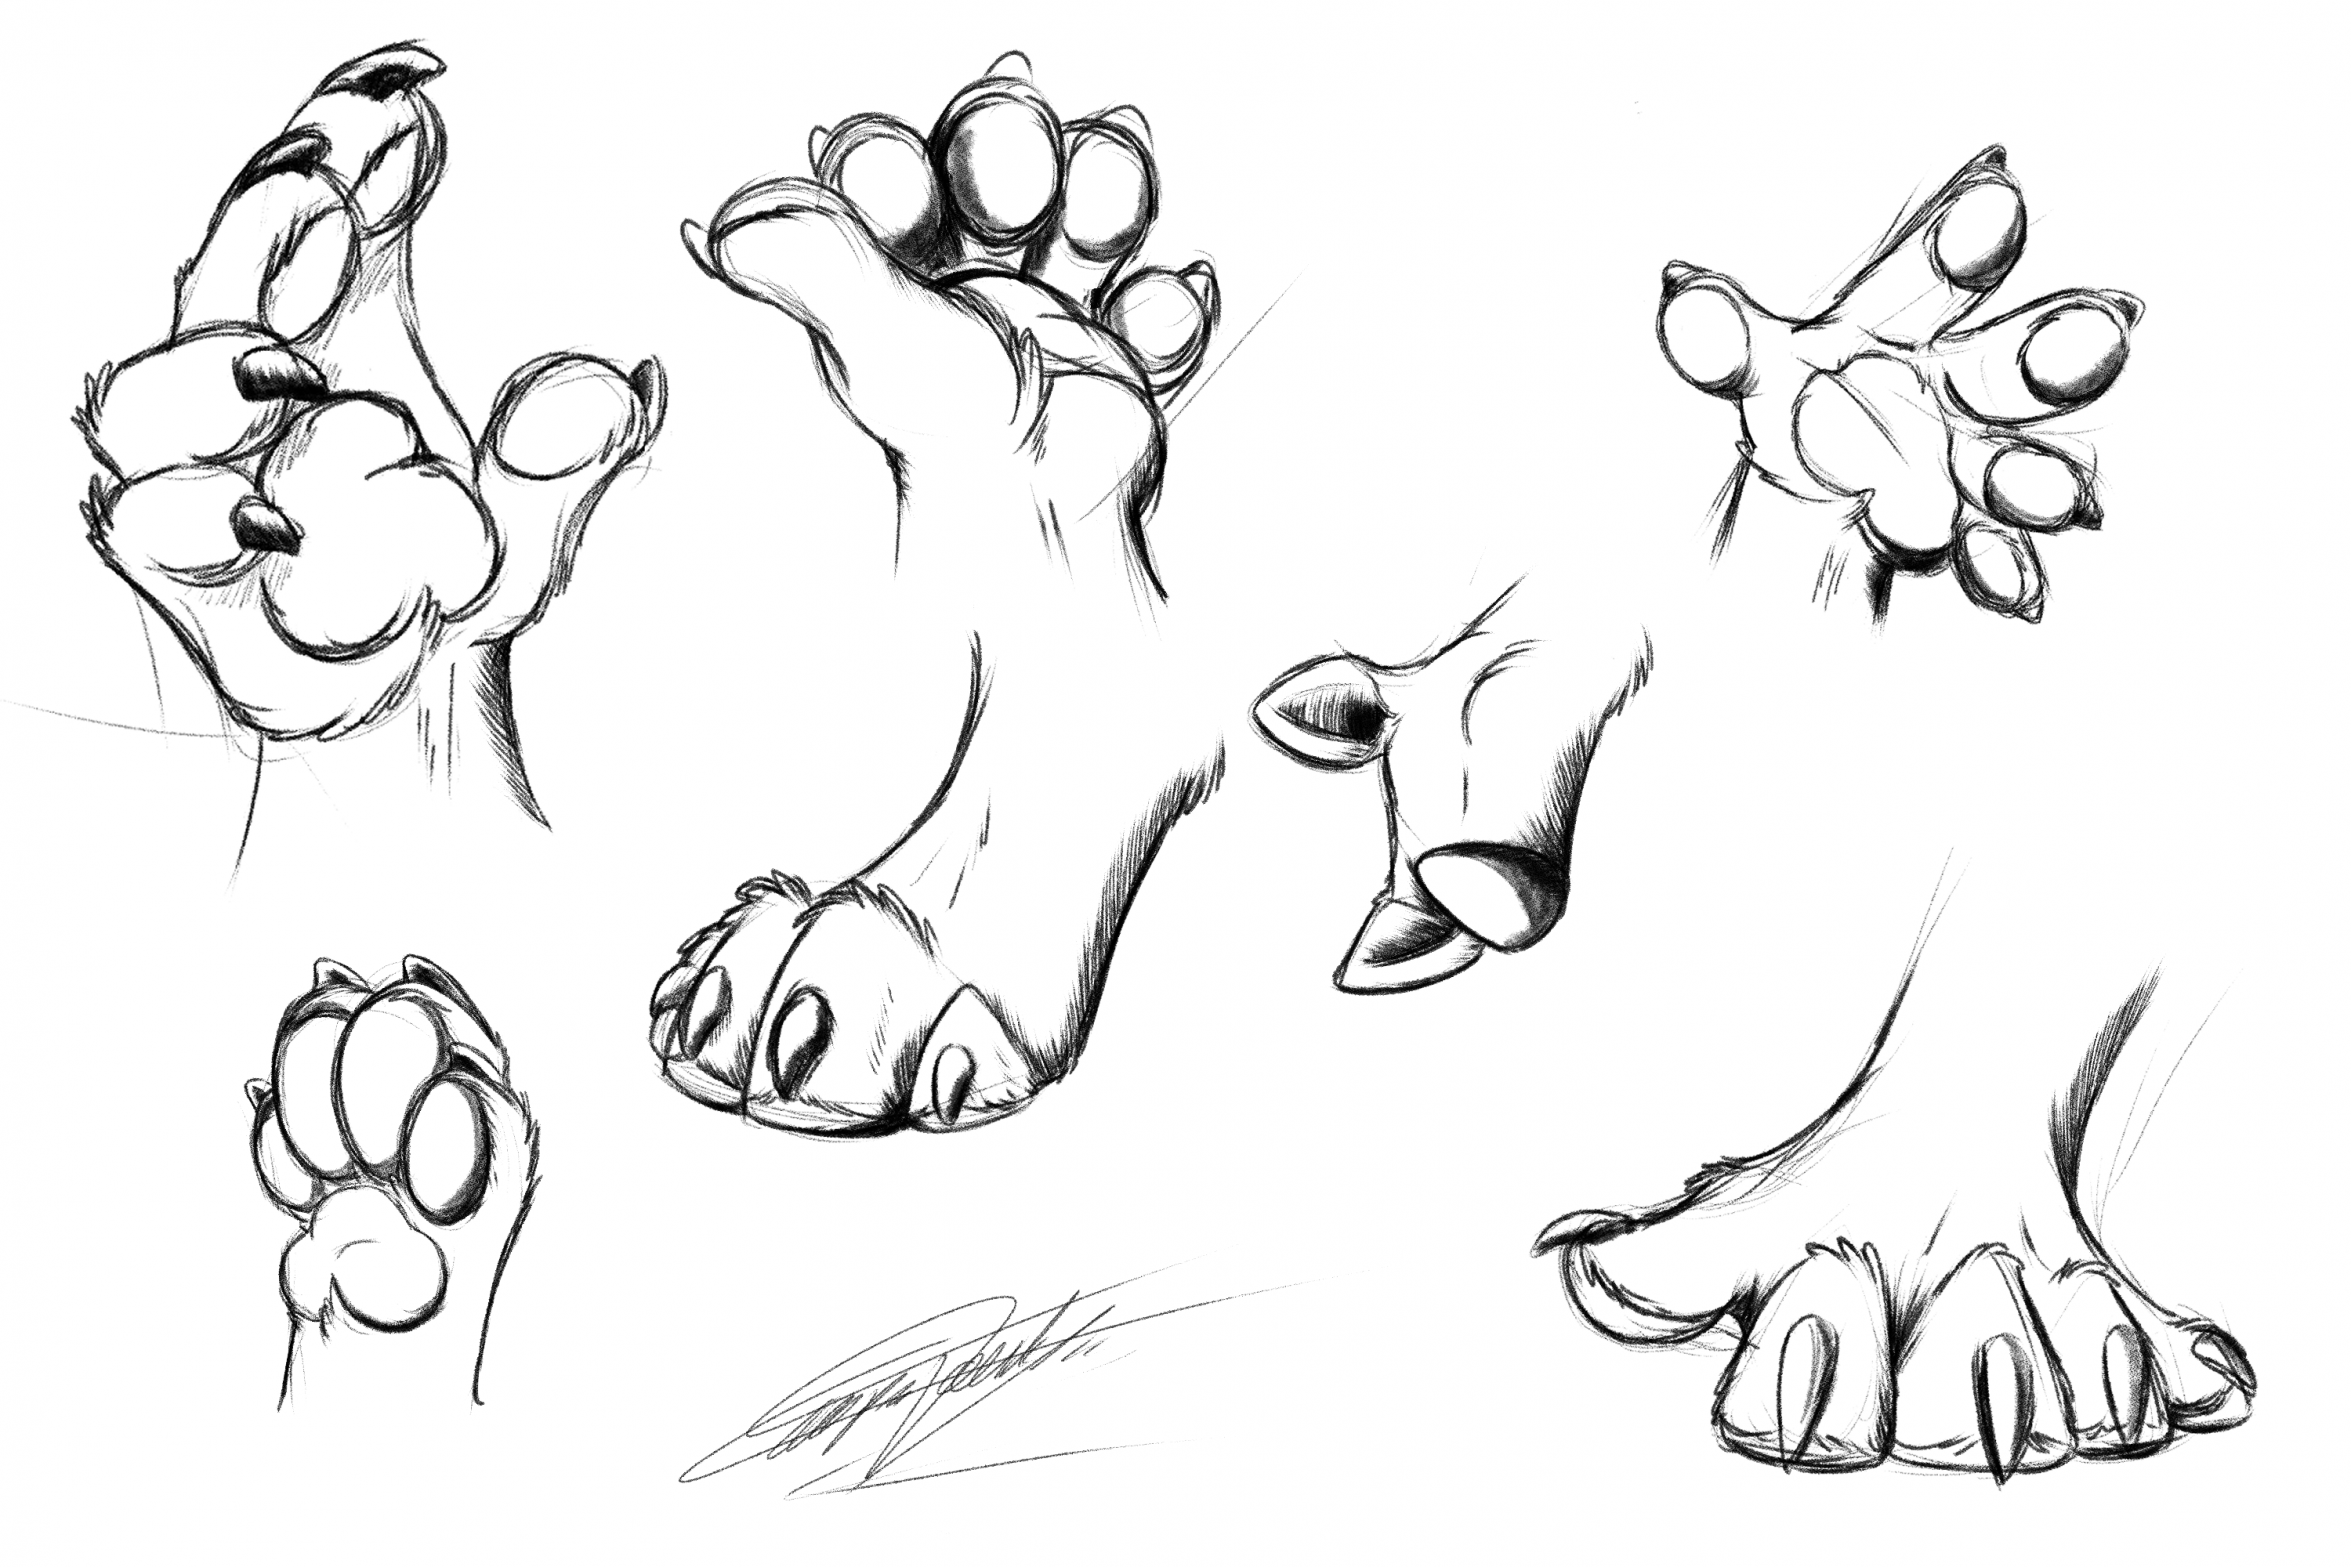 How 2 Draw: Paws n' Claws by shu-pon on DeviantArt